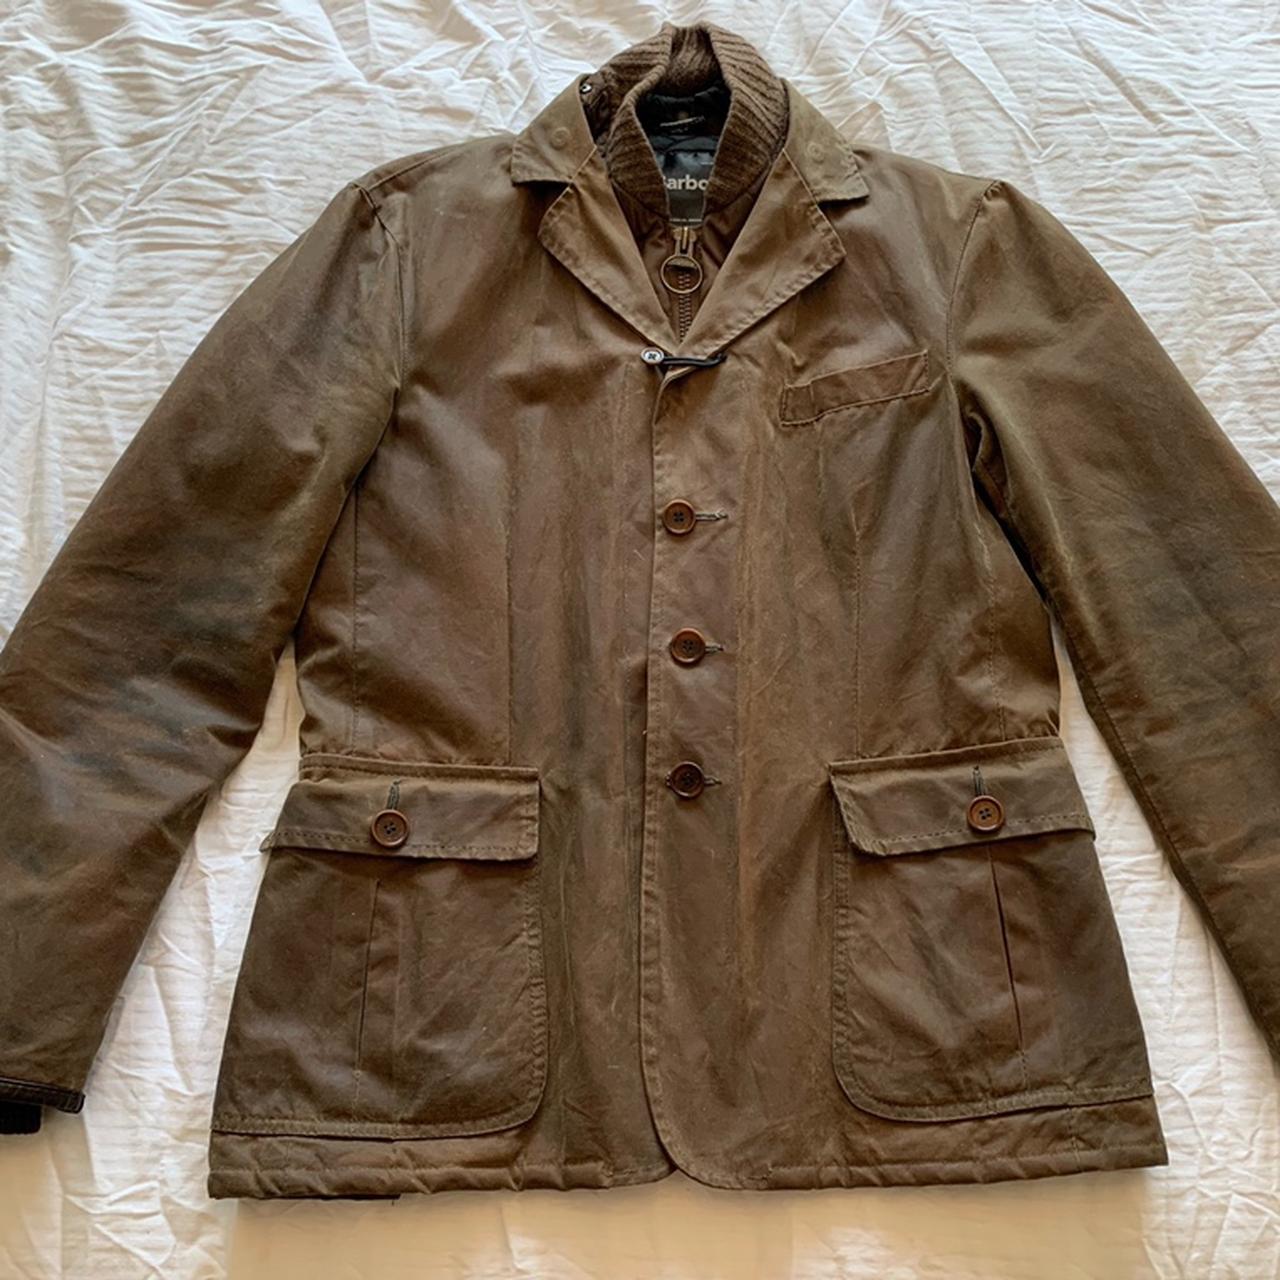 Extremely rare Barbour Lumley waxed jacket. Never - Depop